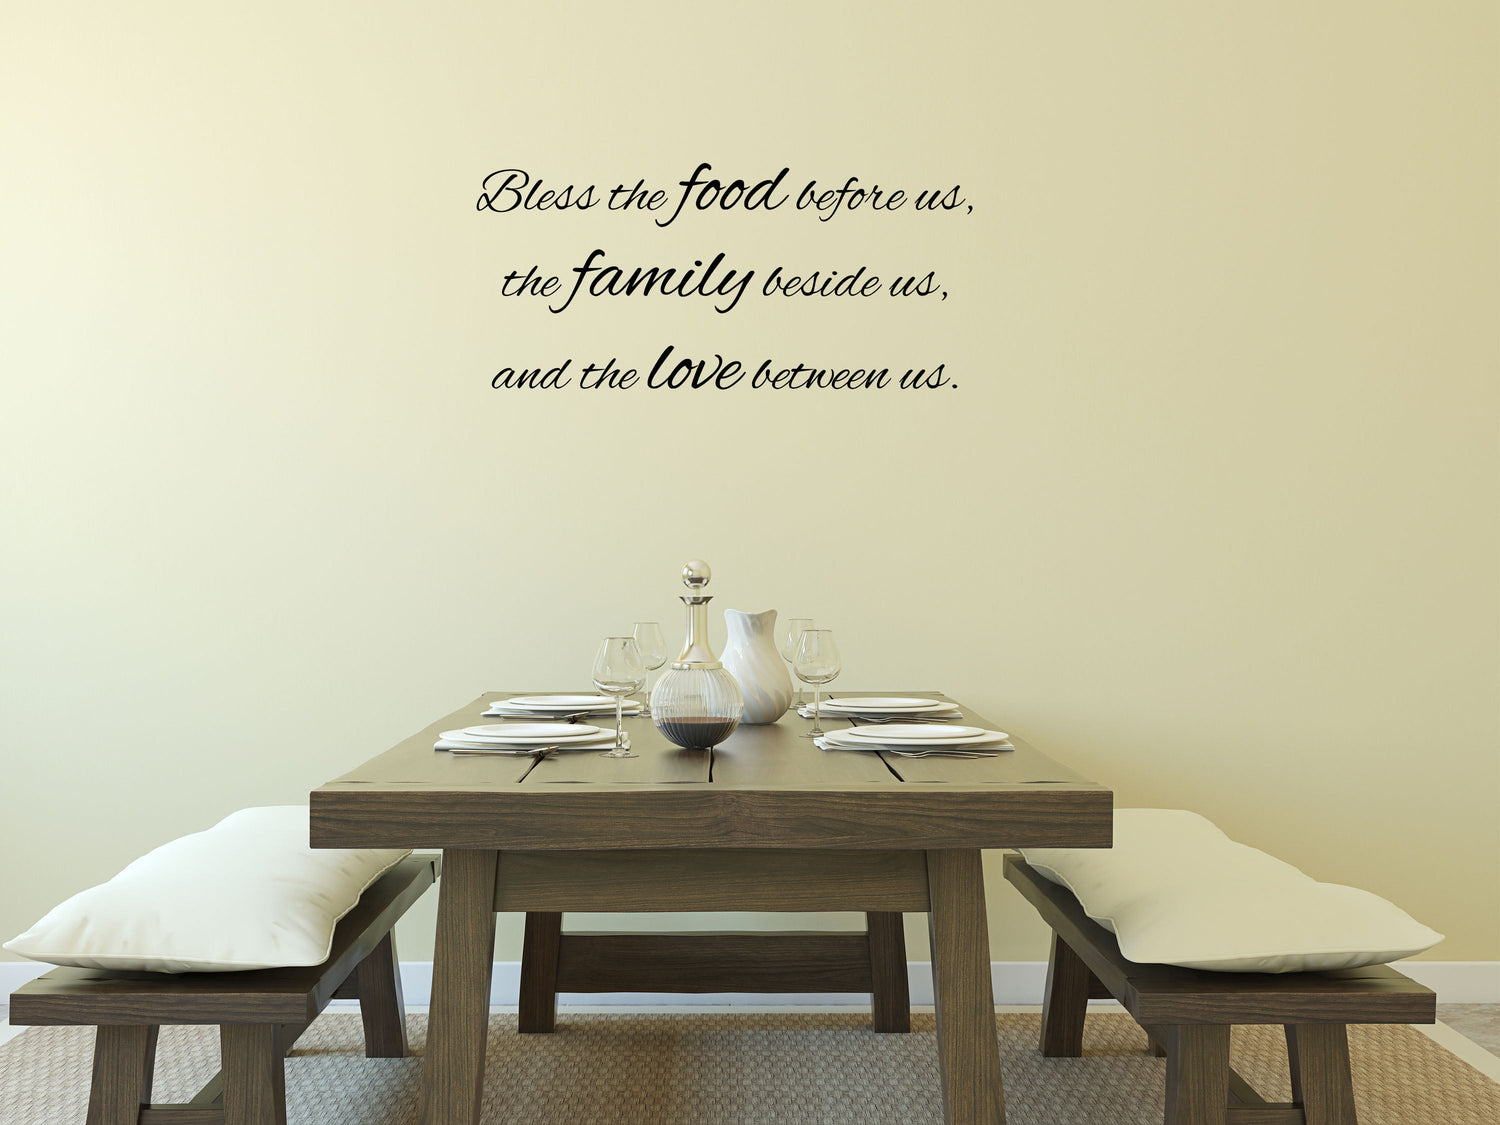 Bless The Food Before Us - Kitchen Wall Saying Vinyl Wall Lettering Decal - Blessing Dining Room Wall Lettering Quote - Wall Words Decor Vinyl Wall Decal Inspirational Wall Signs 